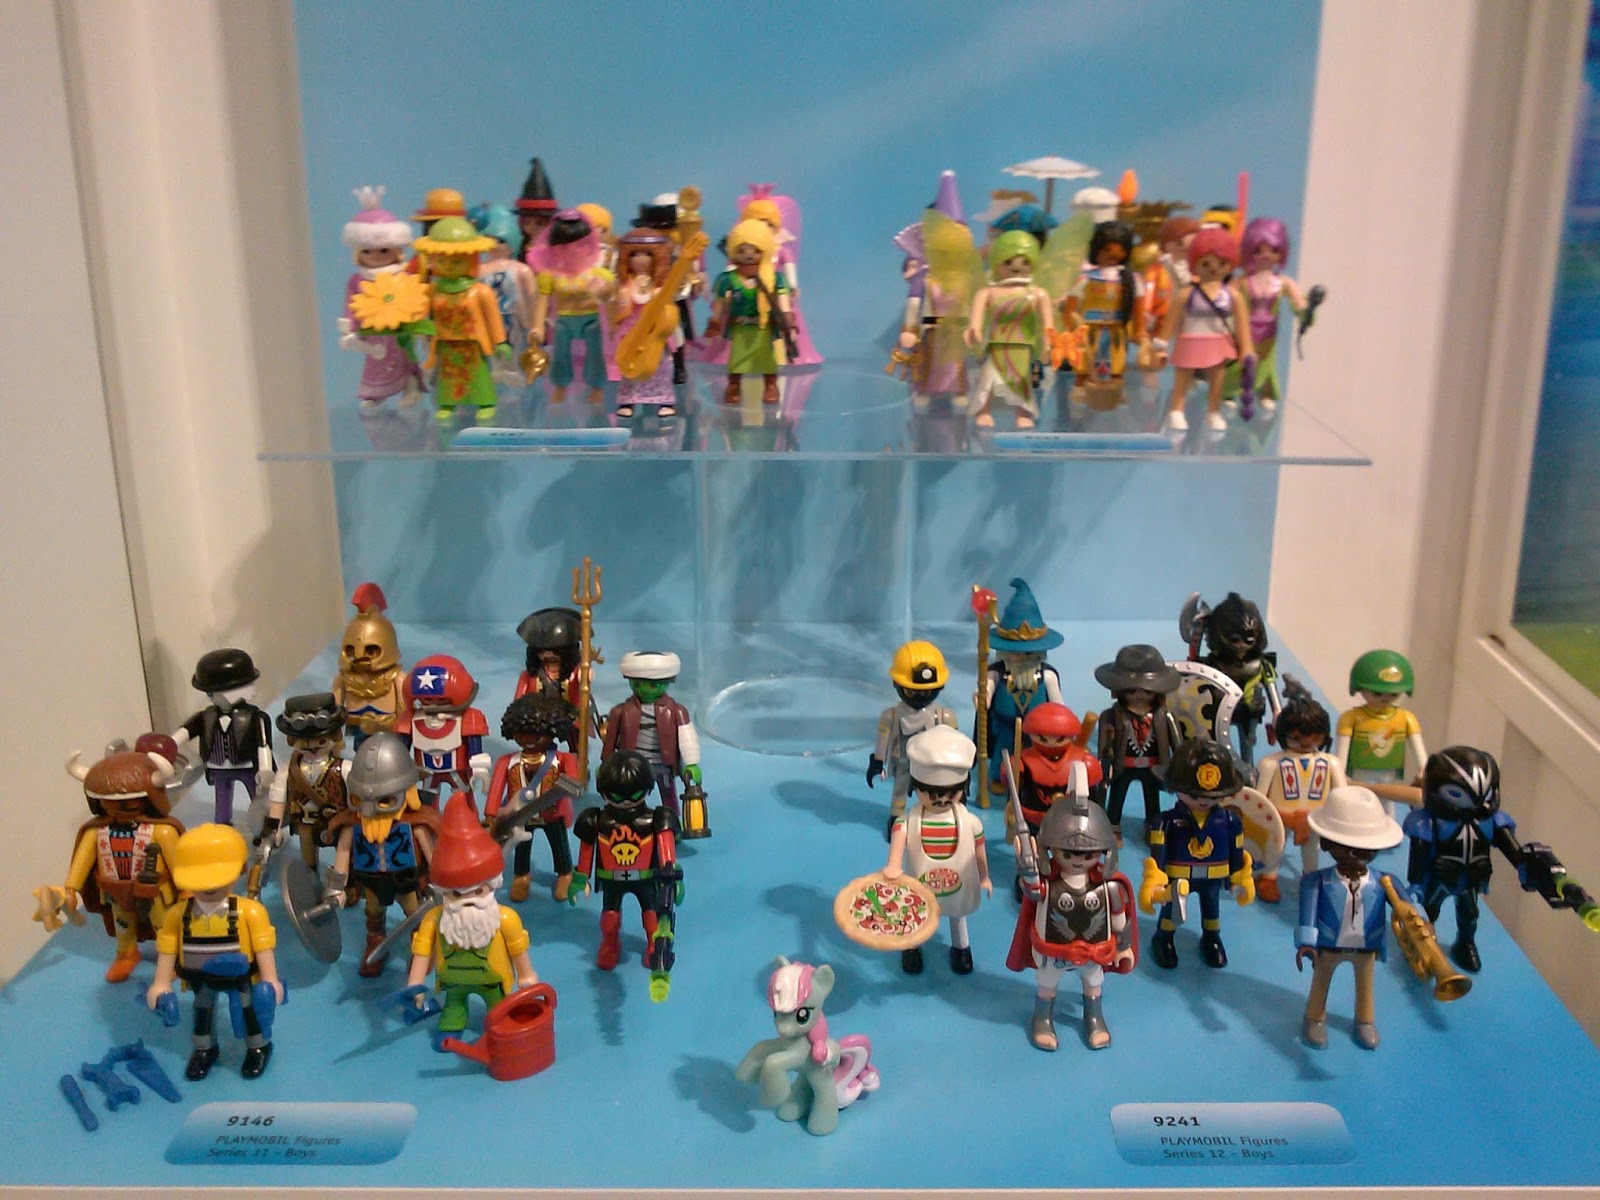 Where's Minty?: Playmobil at the 2017 Toy Fair